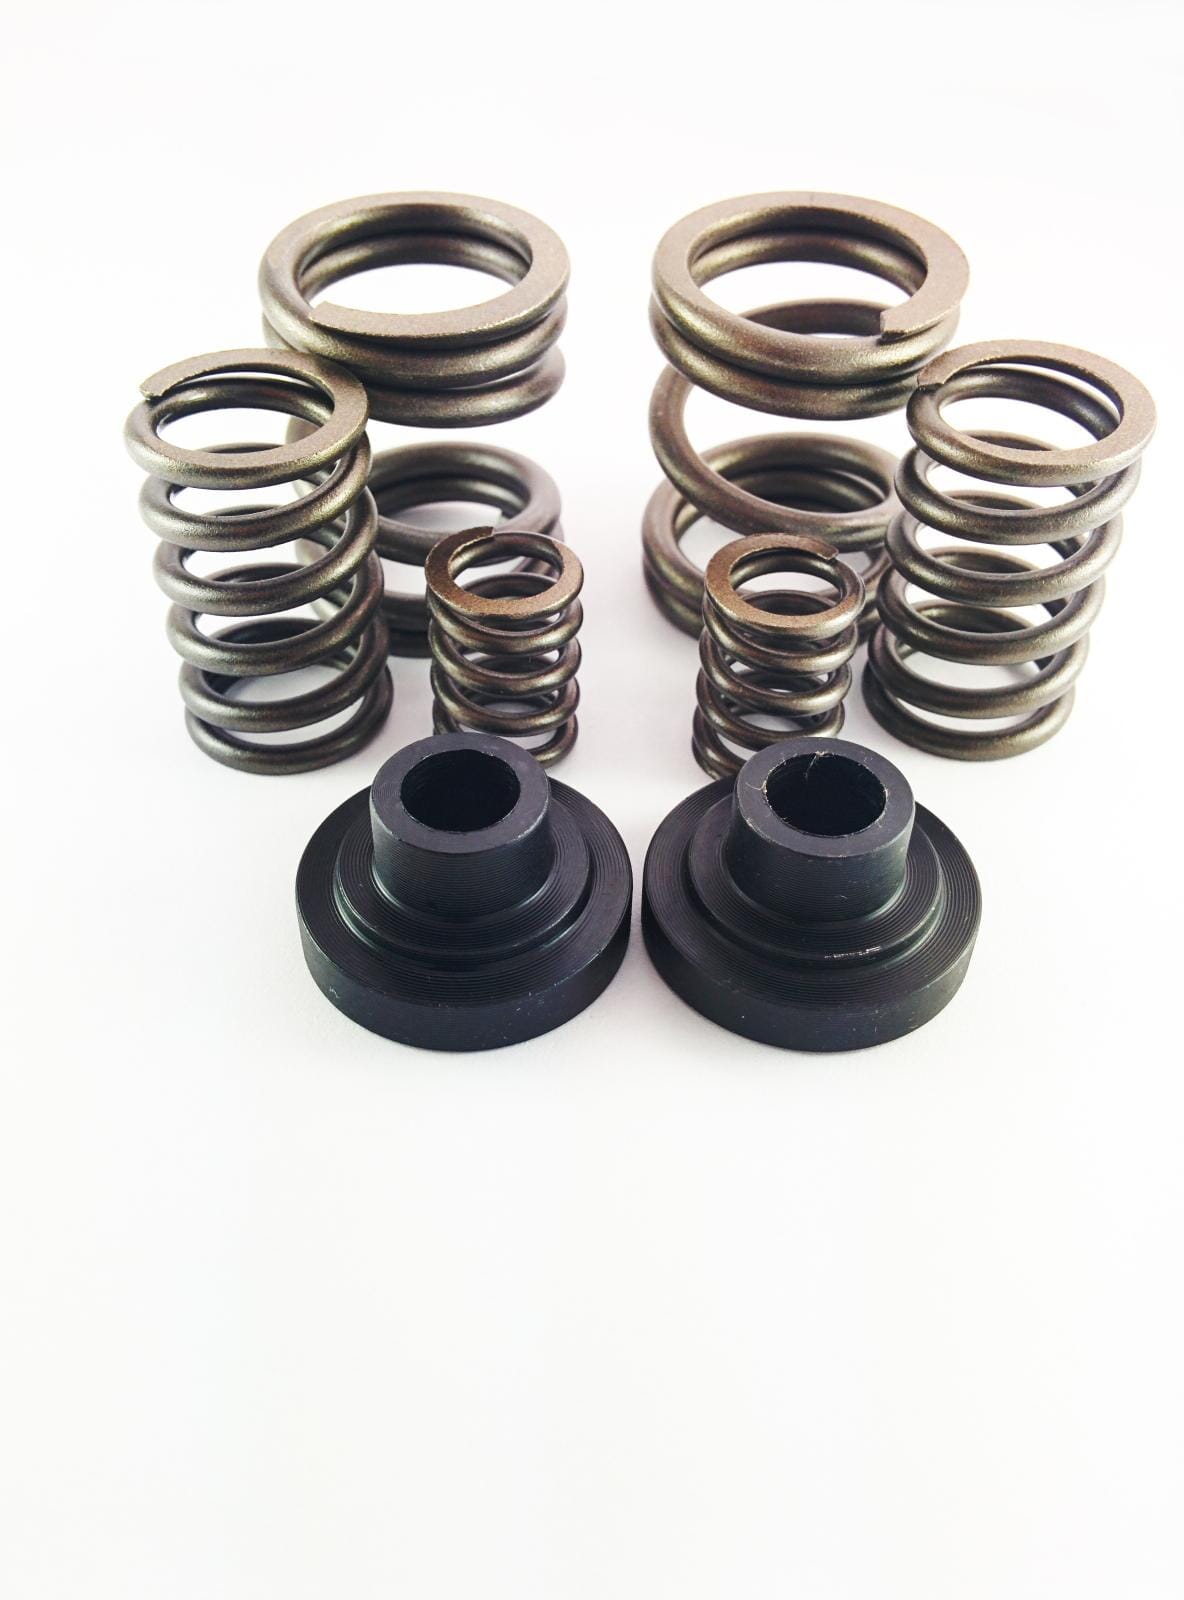 P-Pump 3,000 and 4,000 RPM Governor Spring Kit (Dodge 94-98) Diesel Governor Spring Dynomite Diesel 